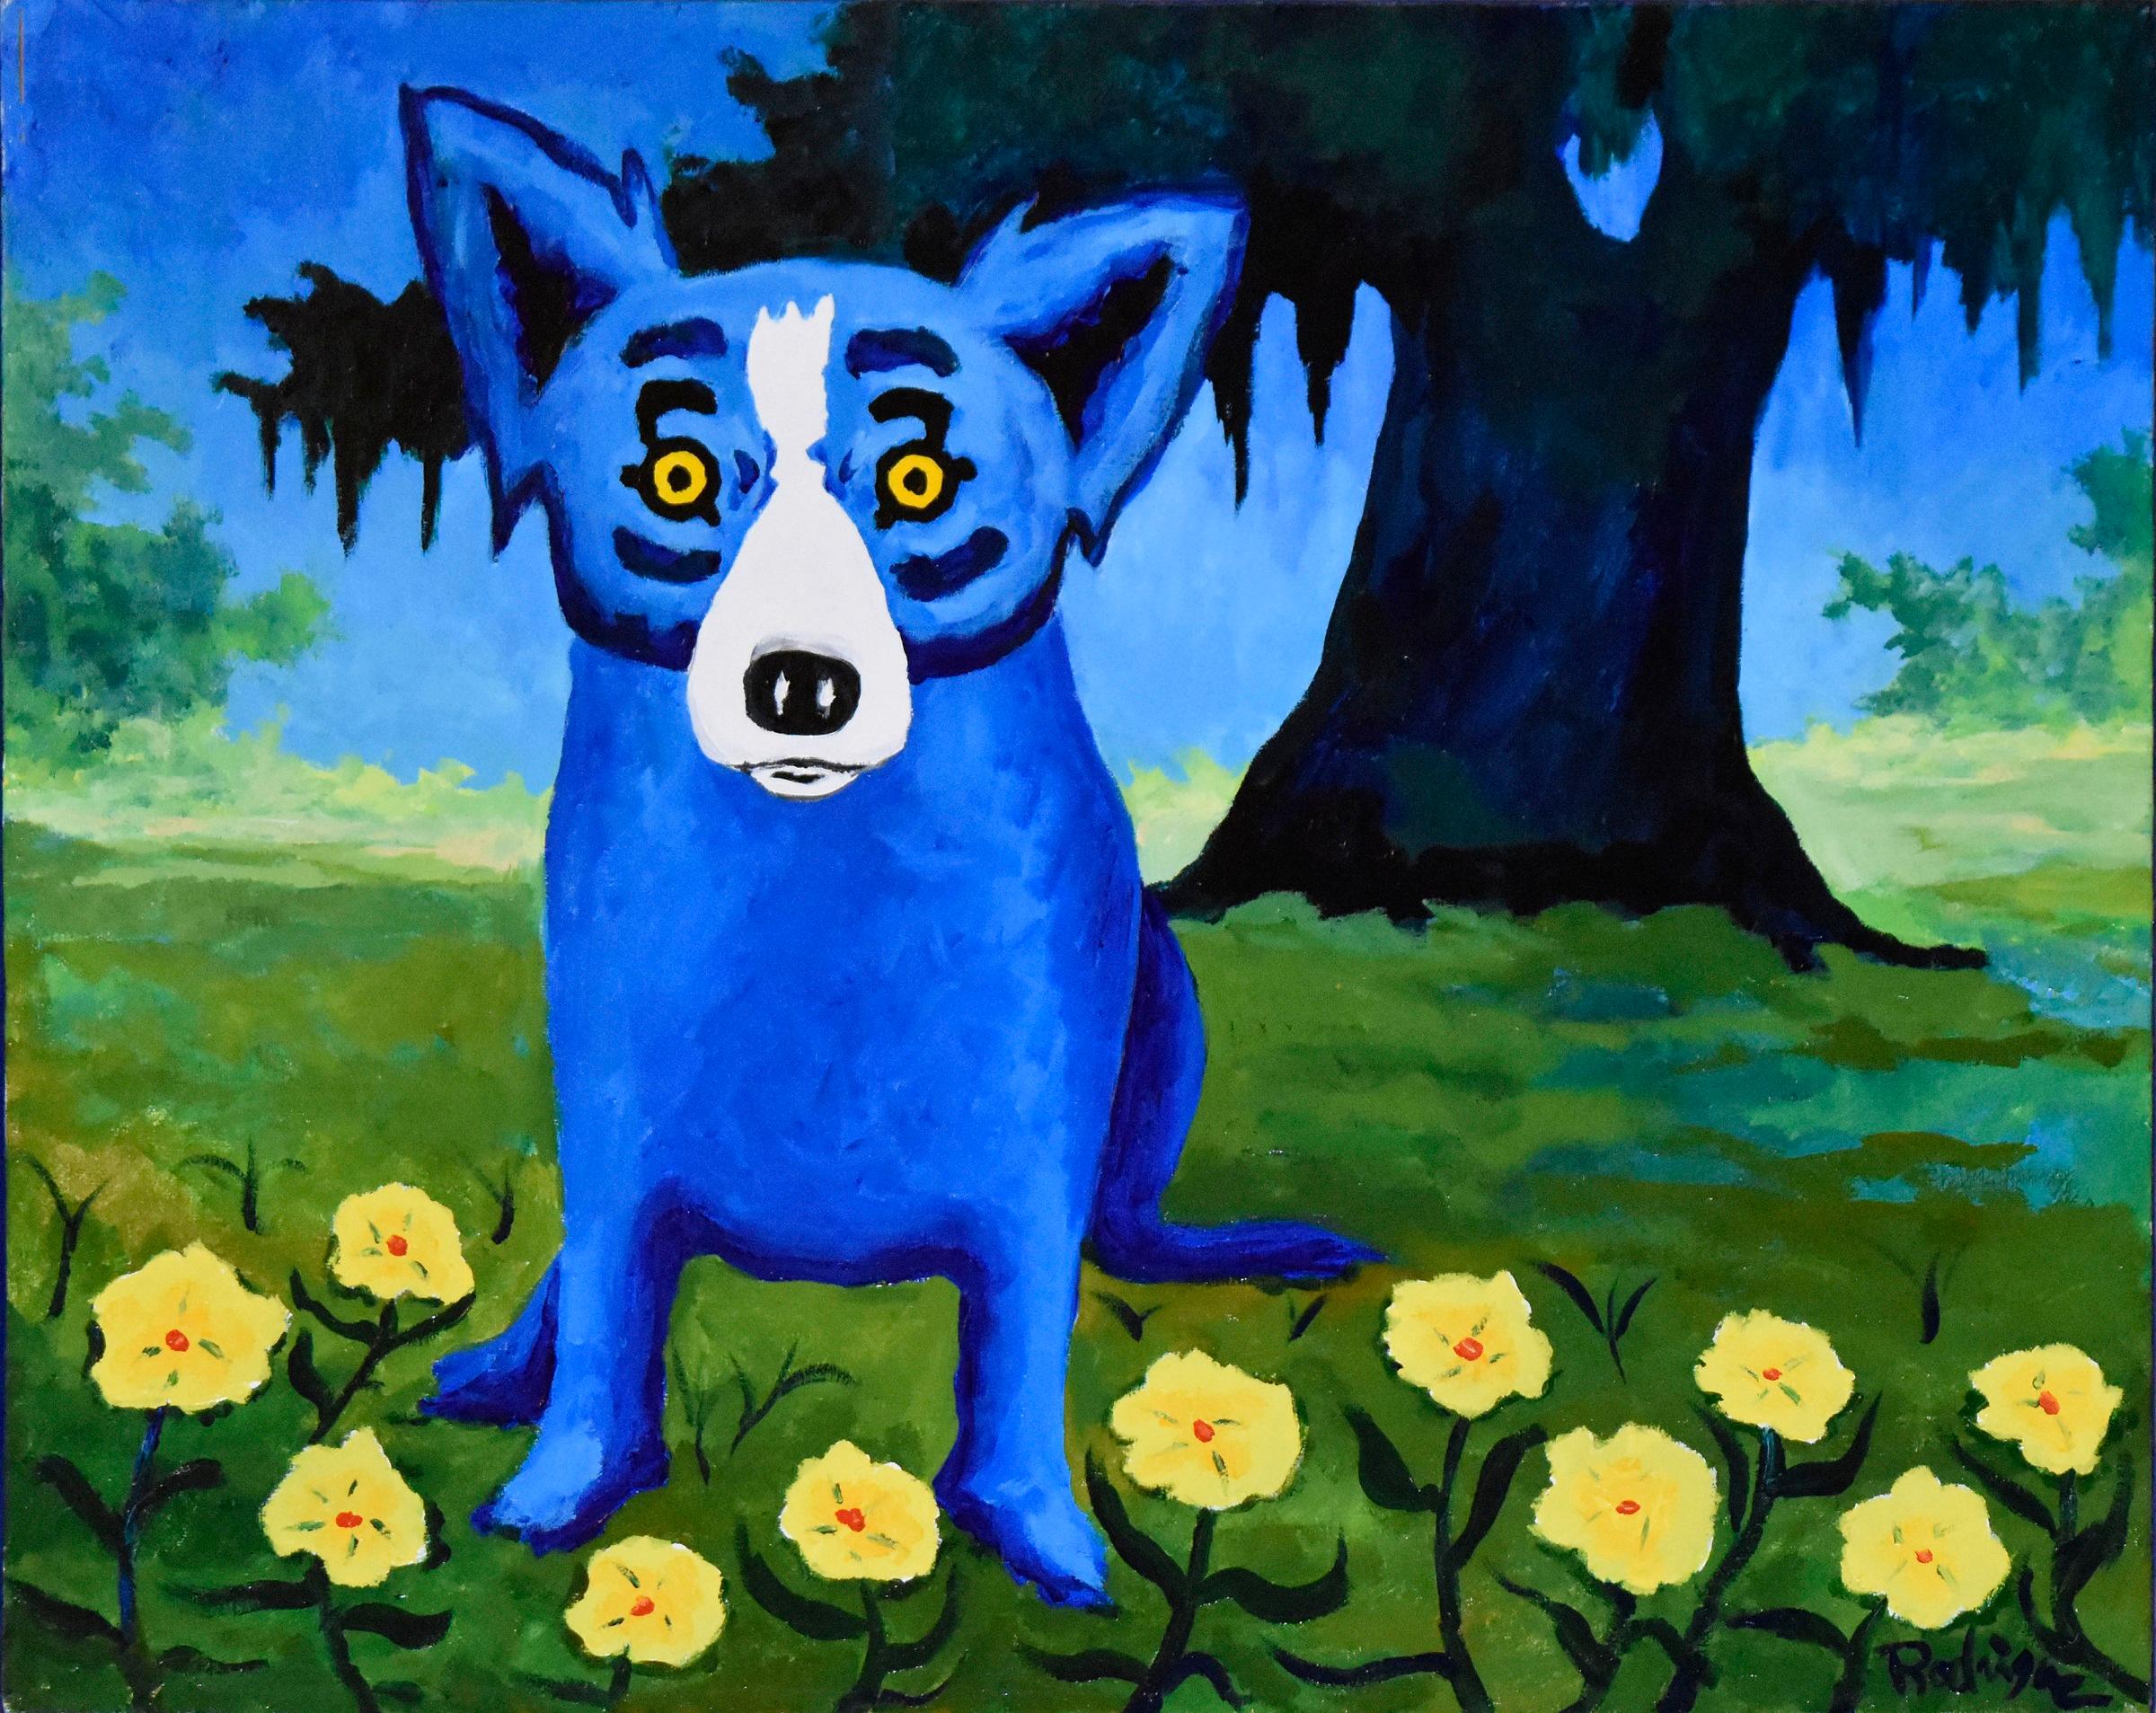 This Blue Dog work consists of a scenic background of sky, earth and trees with a large dark leafy tree and yellow flowers at the feet of a single blue dog.  The dog has soulful yellow eyes.  This pop art animal original oil on canvas painting is